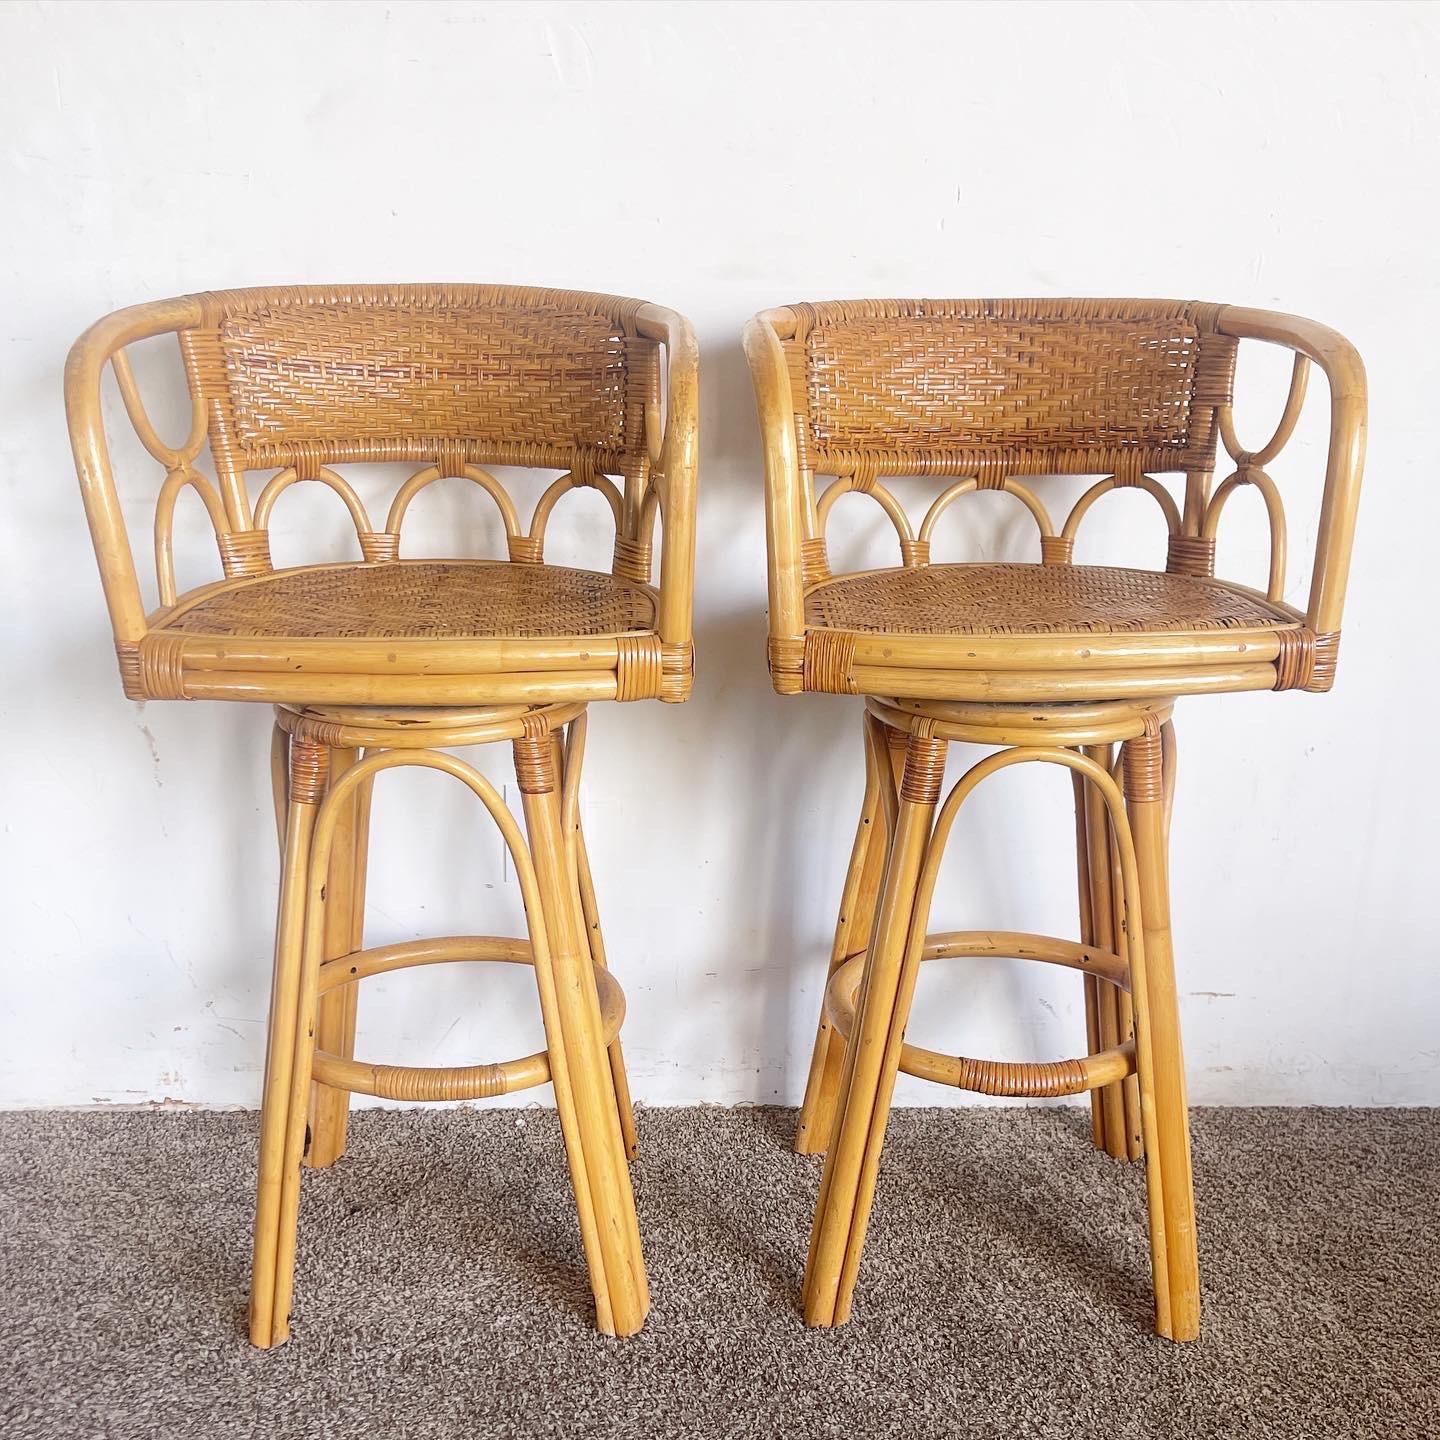 Boho Chick Bamboo Rattan and Wicker Swivel Stools - a Pair For Sale